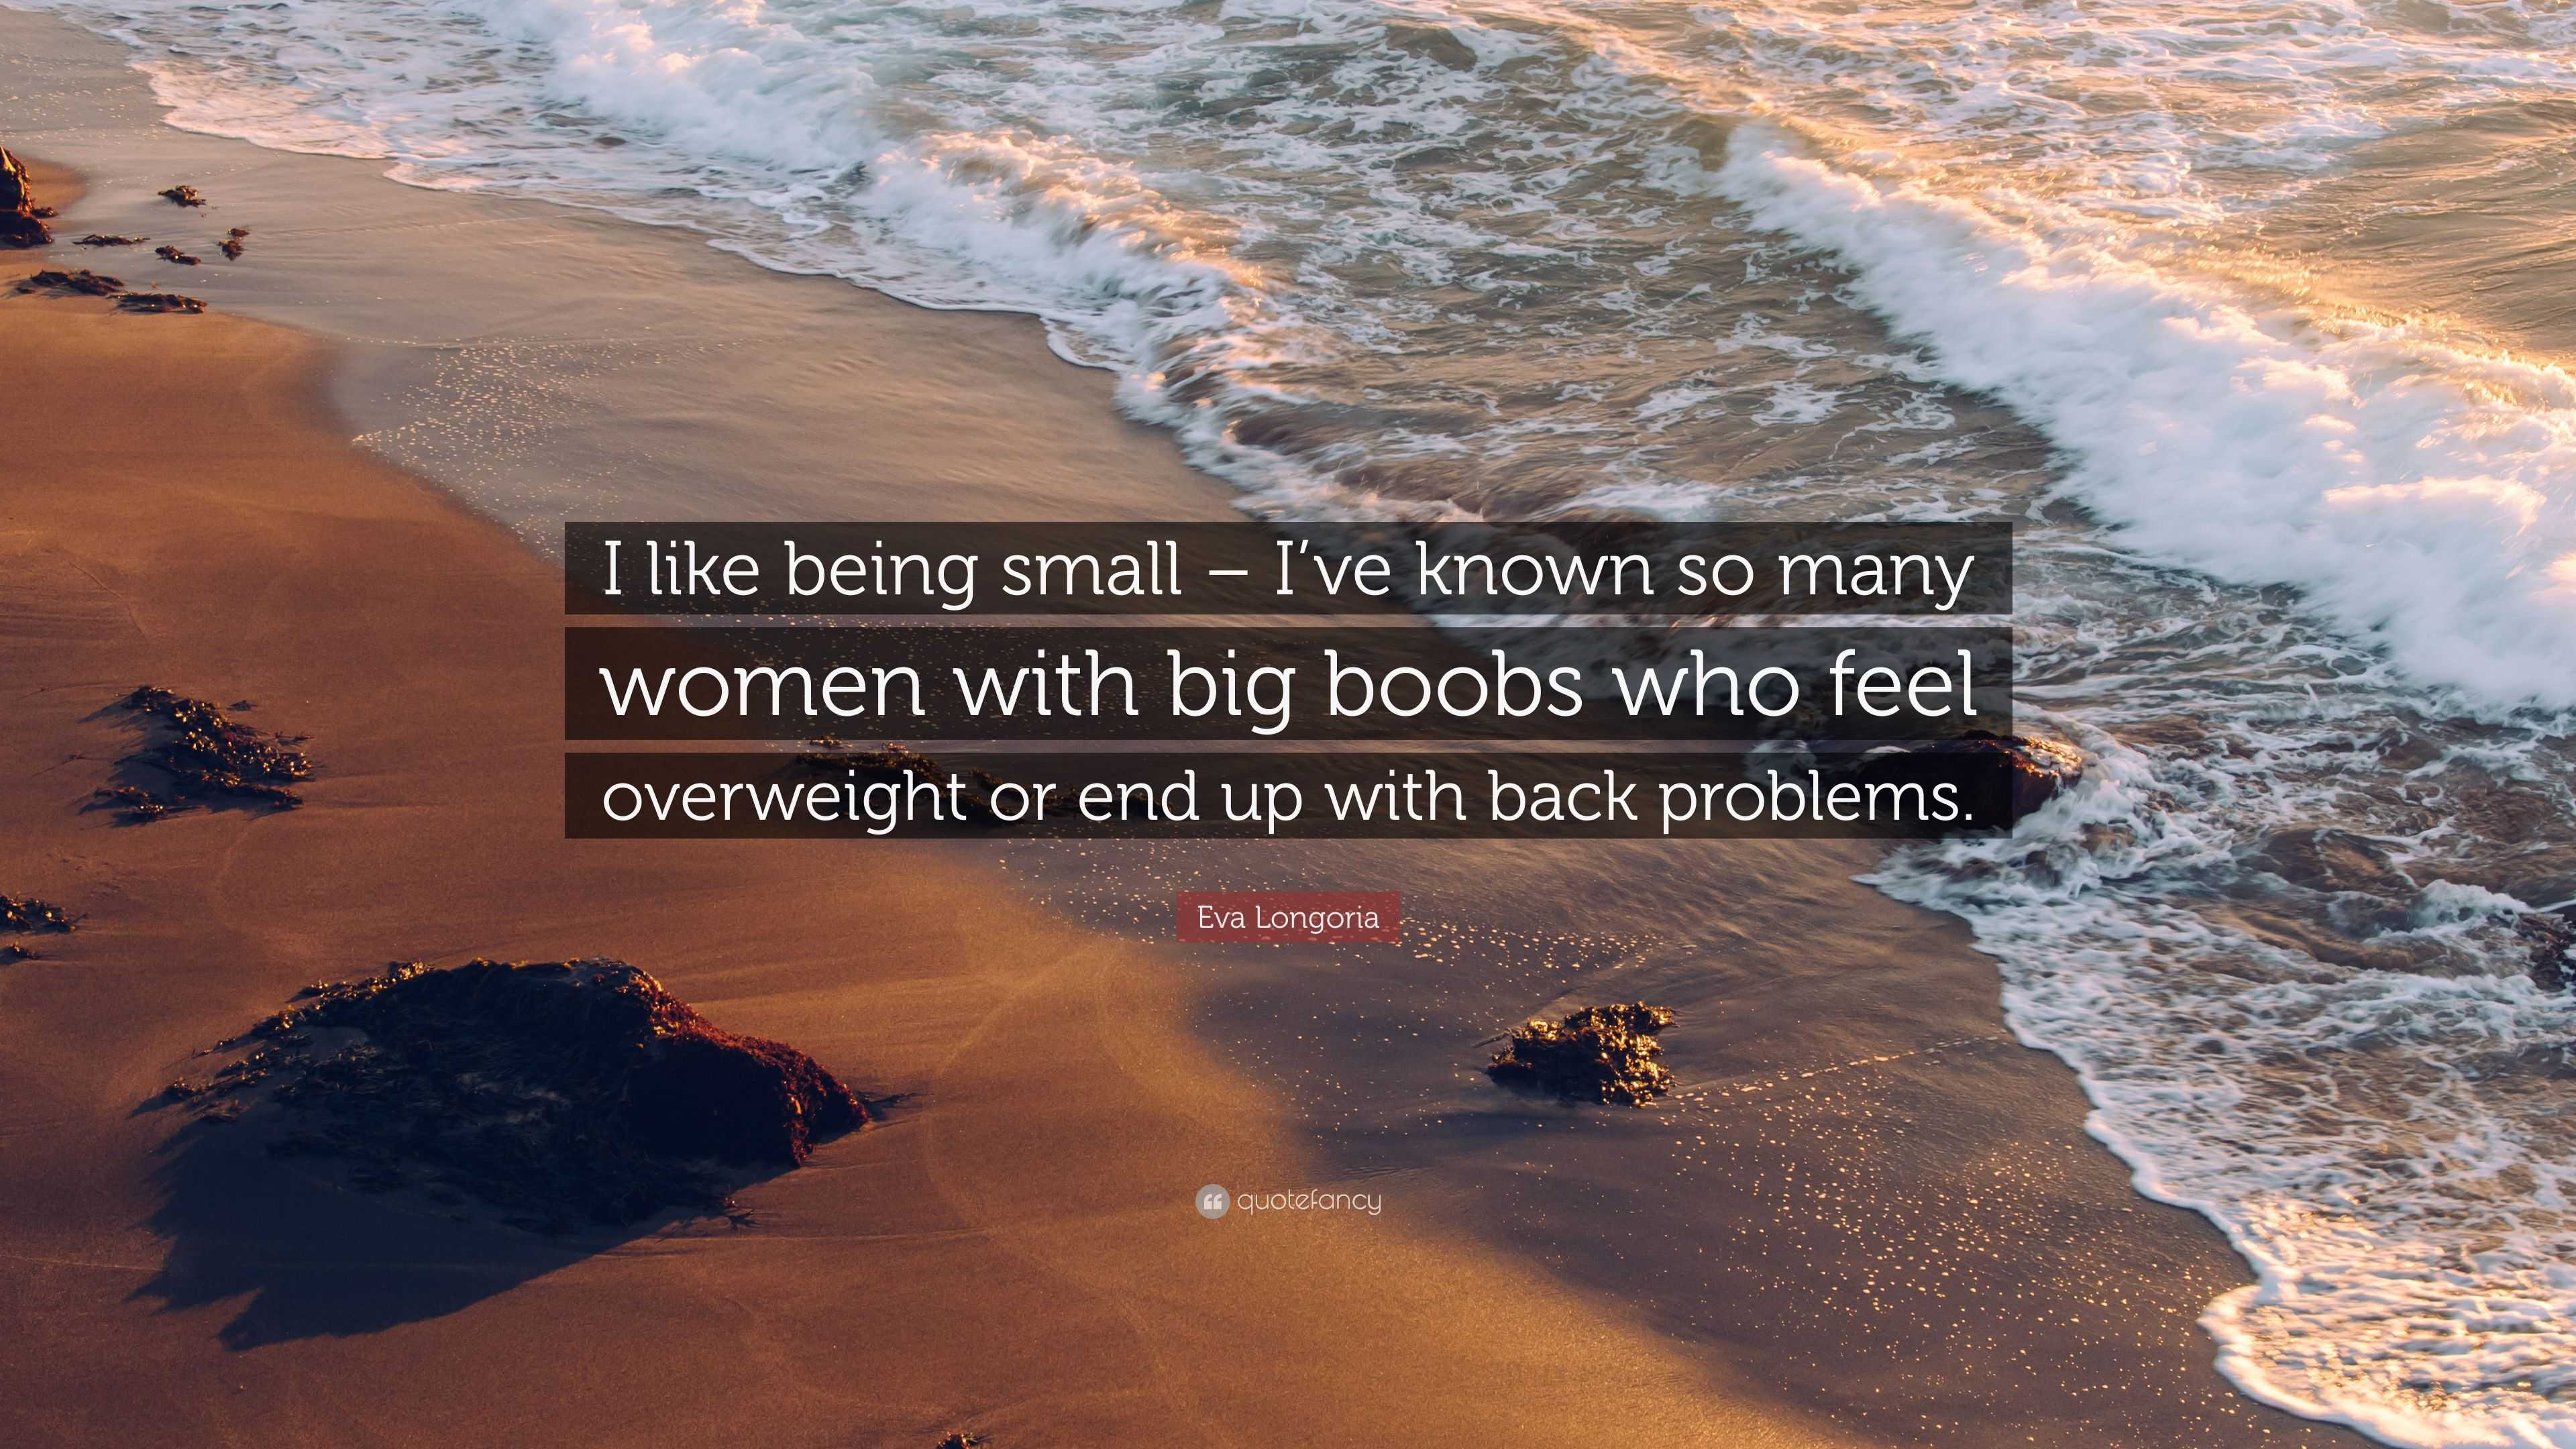 Eva Longoria Quote: “I like being small – I've known so many women